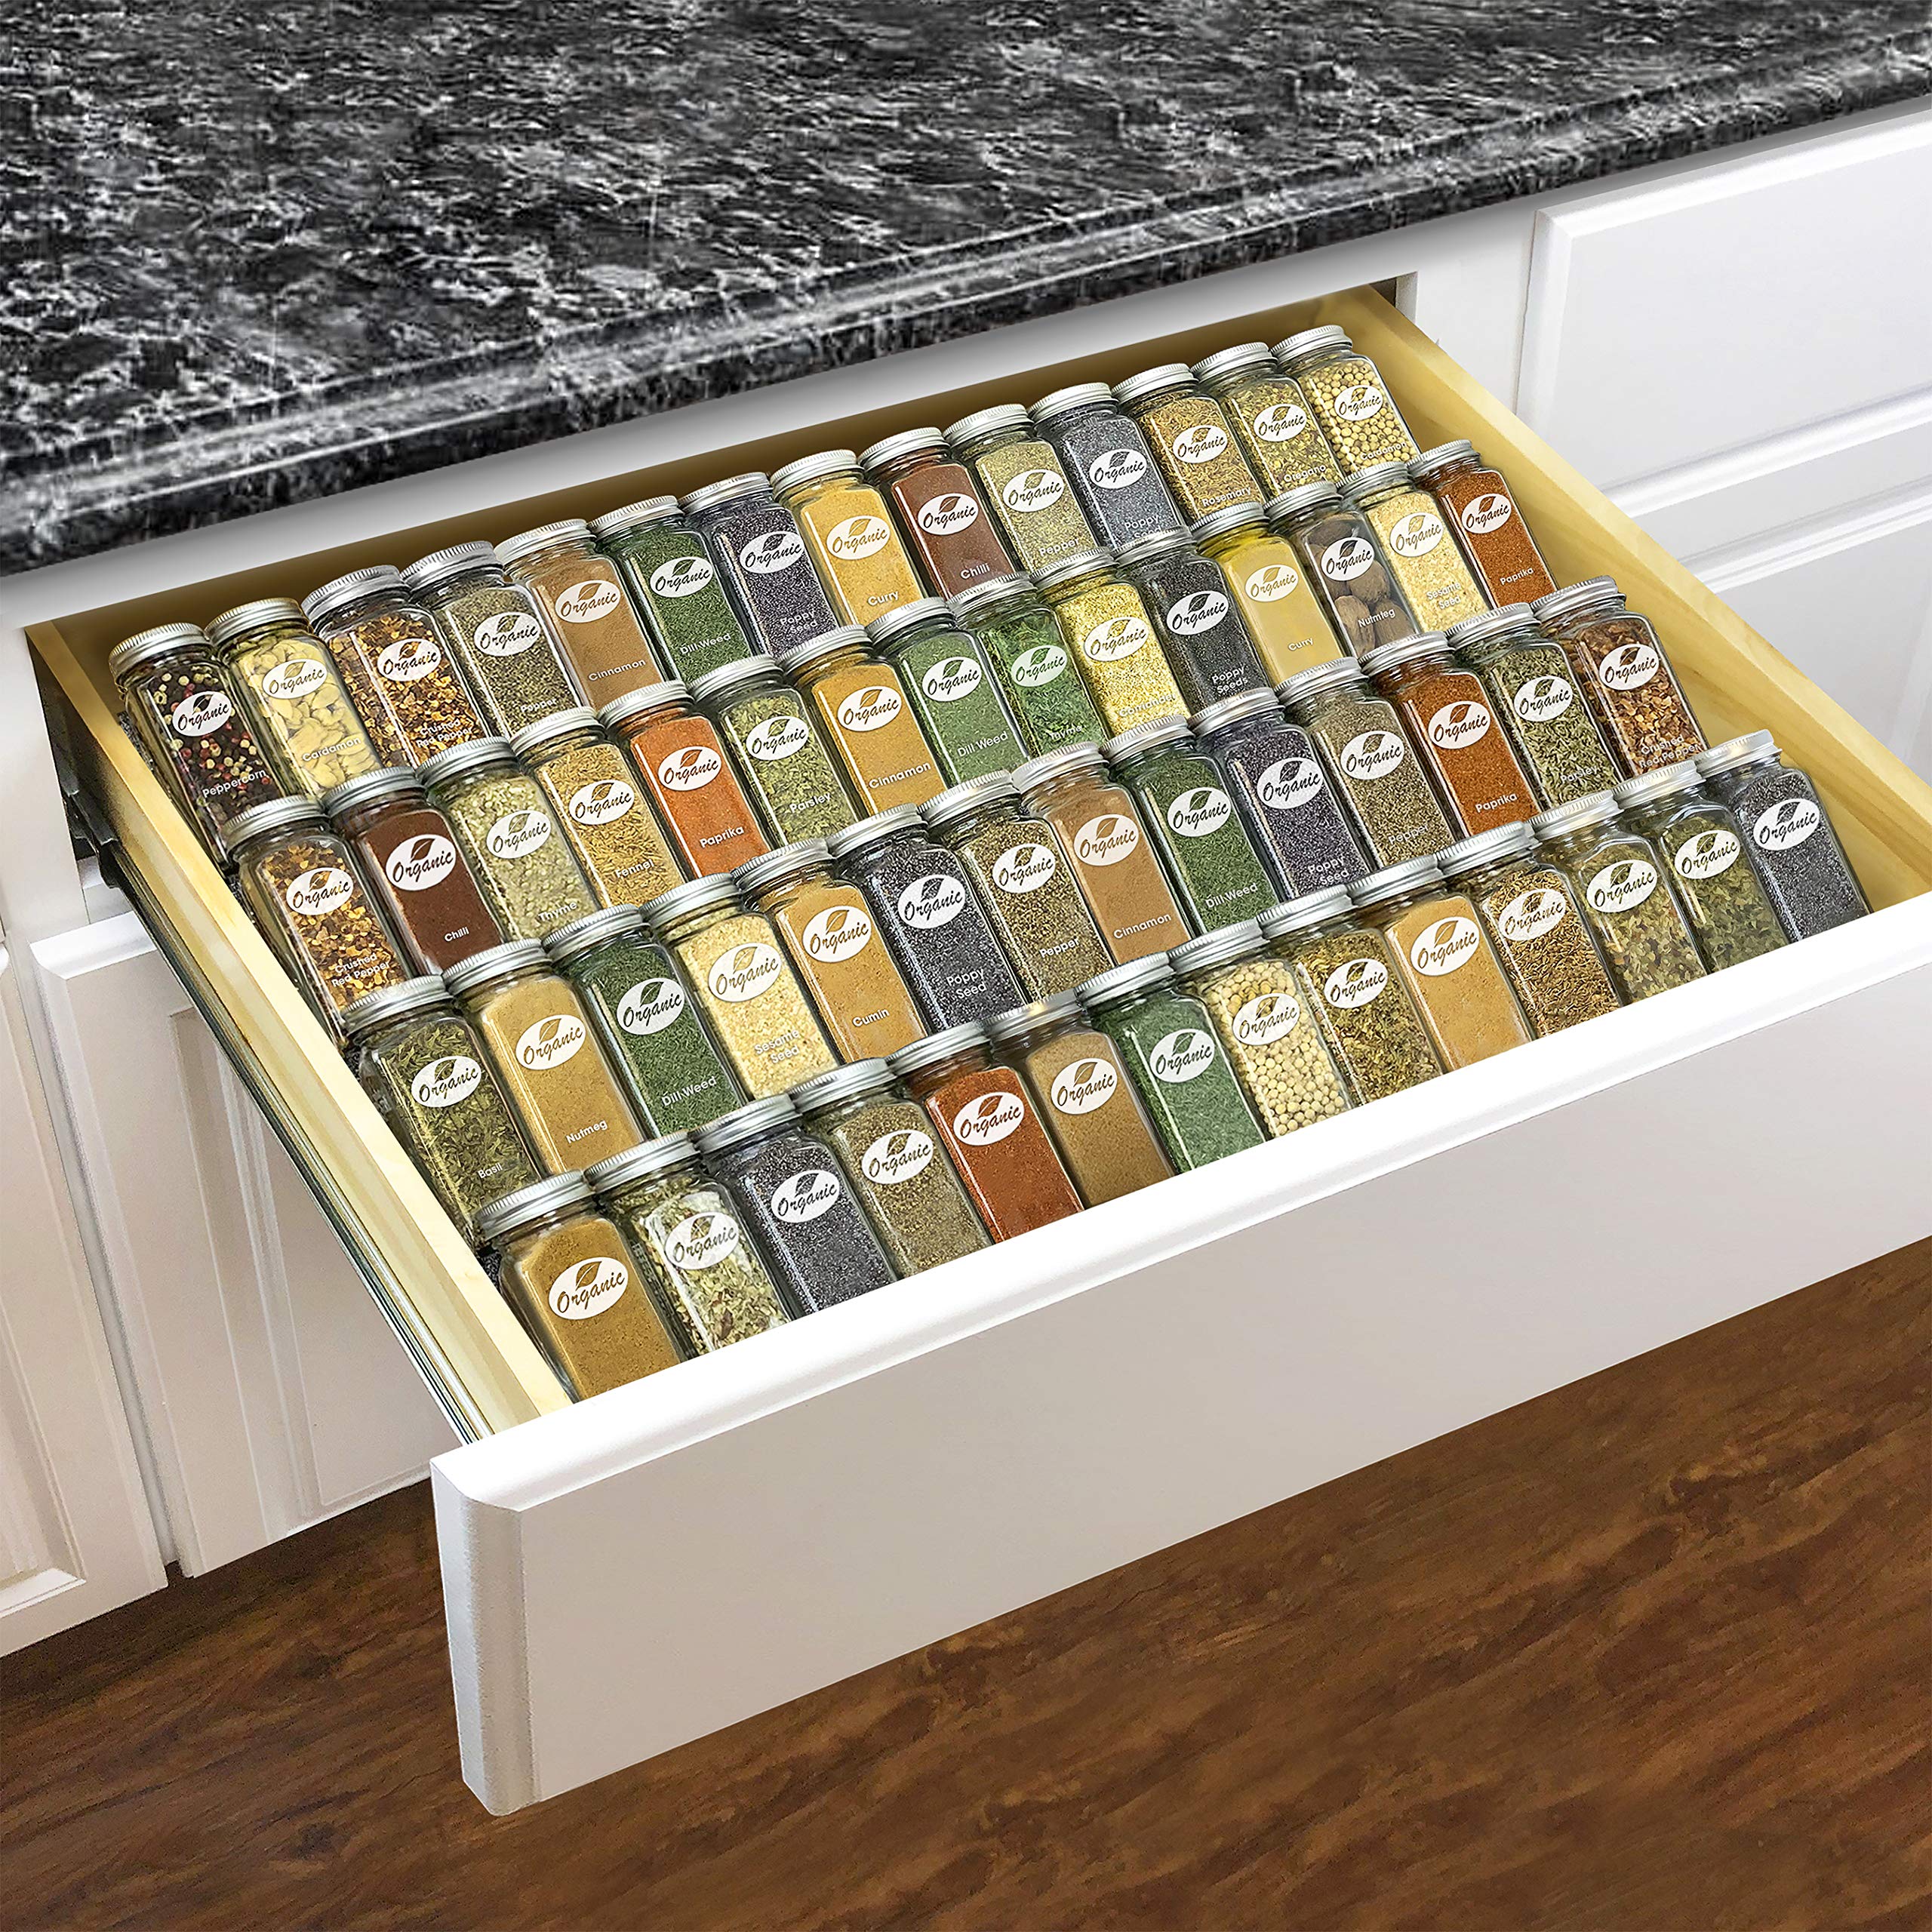 LYNK PROFESSIONAL® Expandable Spice Drawer Organizer - Heavy Gauge Steel 4 Tier Spice Rack - Drawer Insert Tray for Spice Jars, Herbs and Seasoning - Kitchen Cabinet Drawer Storage - Silver Metallic